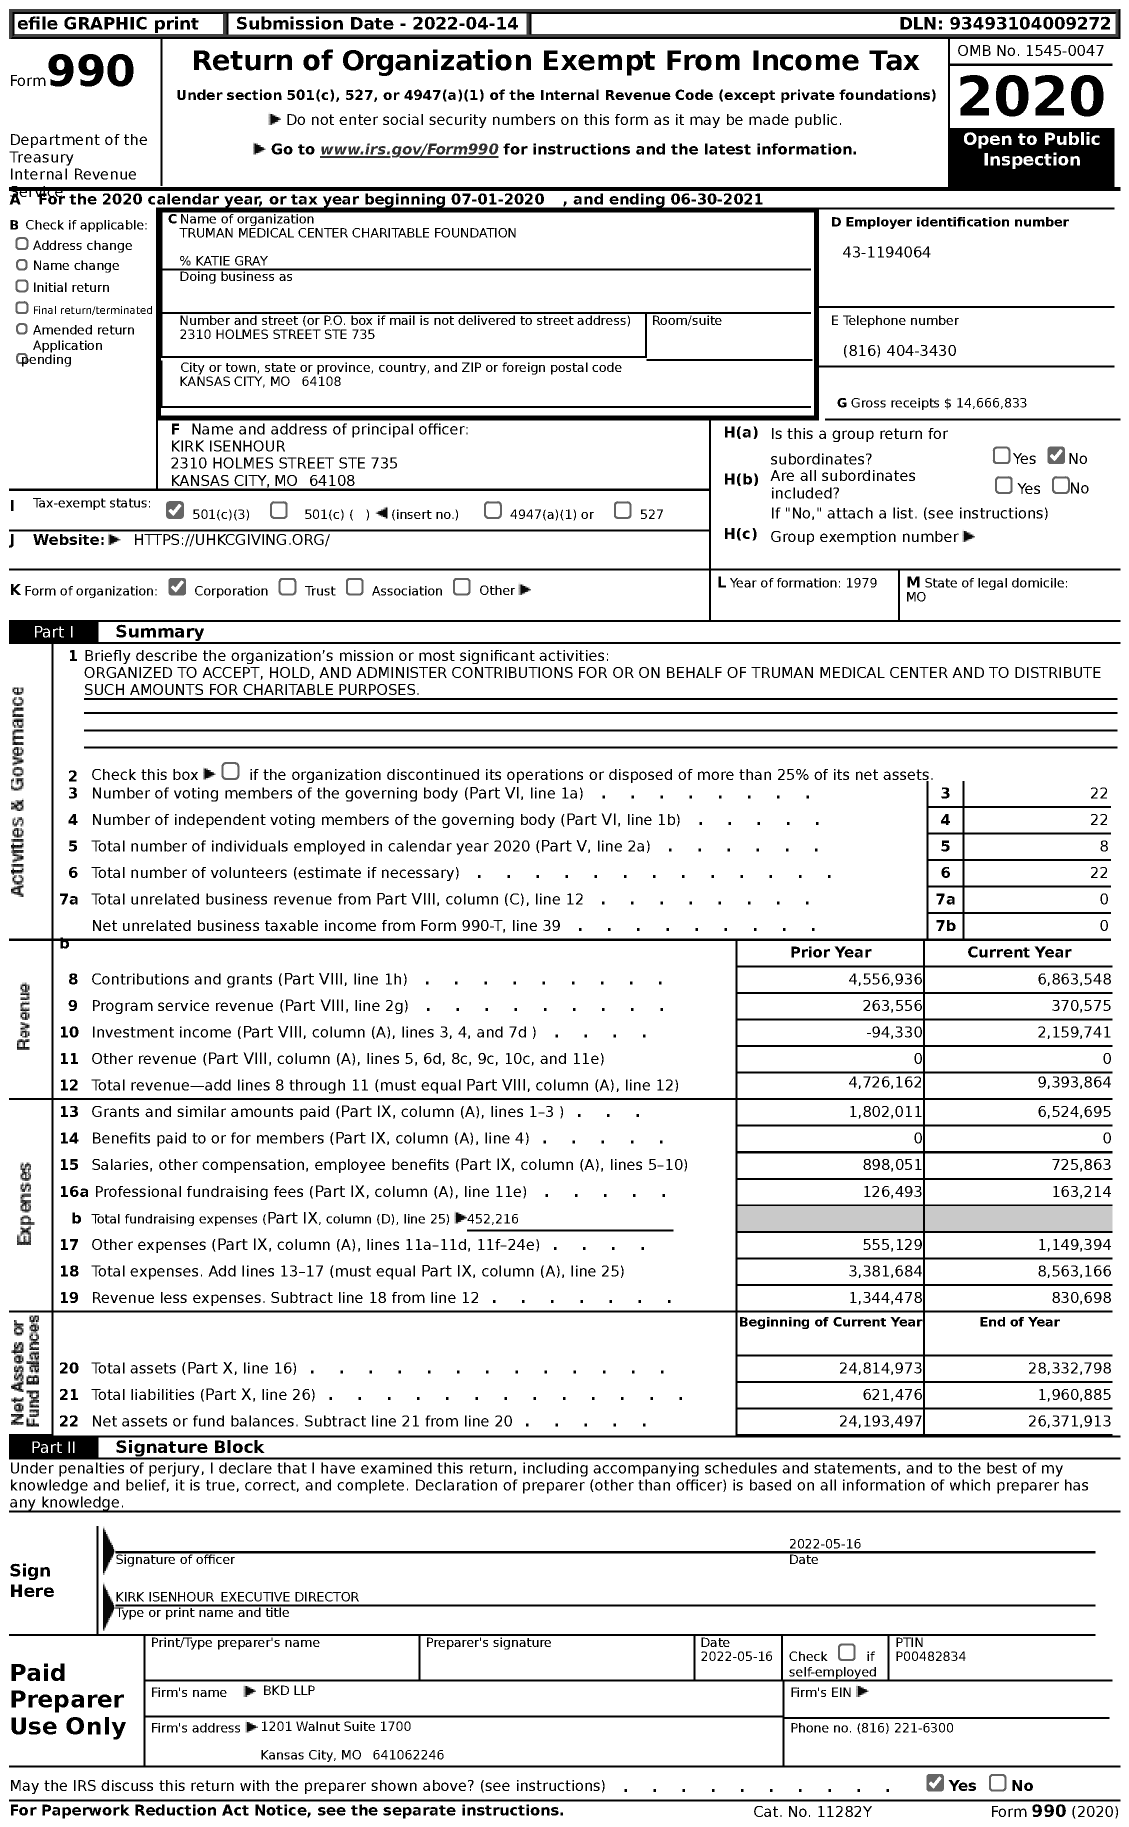 Image of first page of 2020 Form 990 for University Health Foundation / Truman Medical Center Charitable Foundation (TMC)